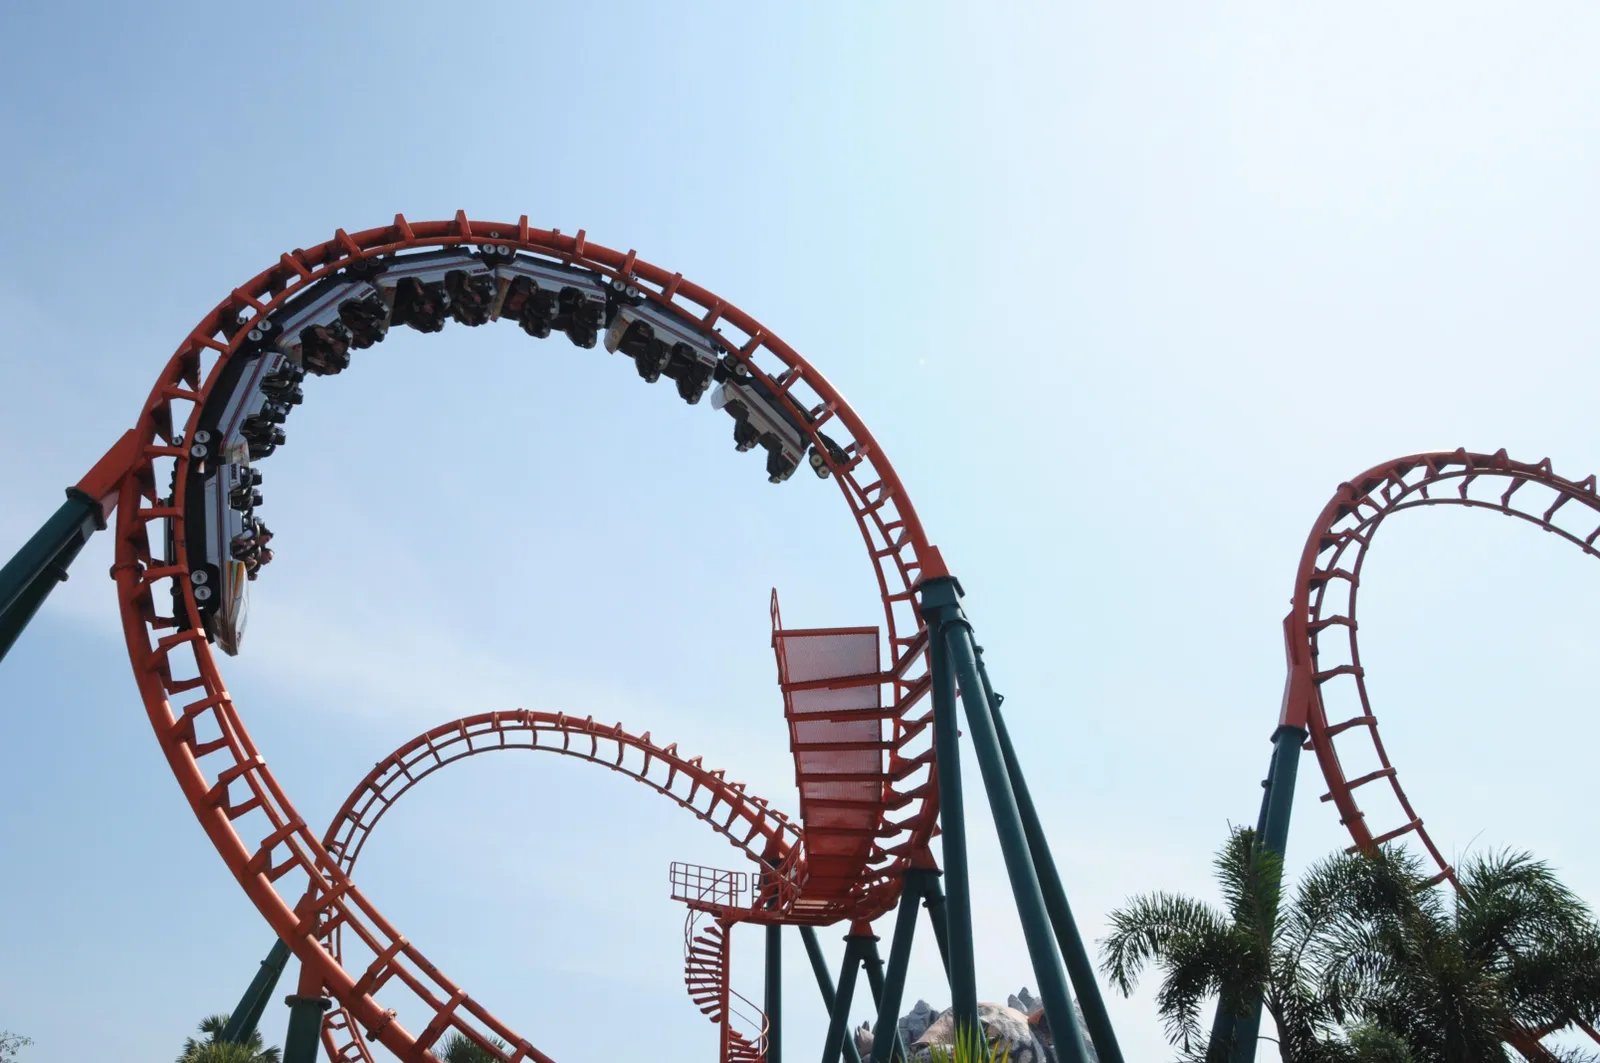 10 quick roller coaster facts to celebrate national roller coaster day -  ABC7 Chicago